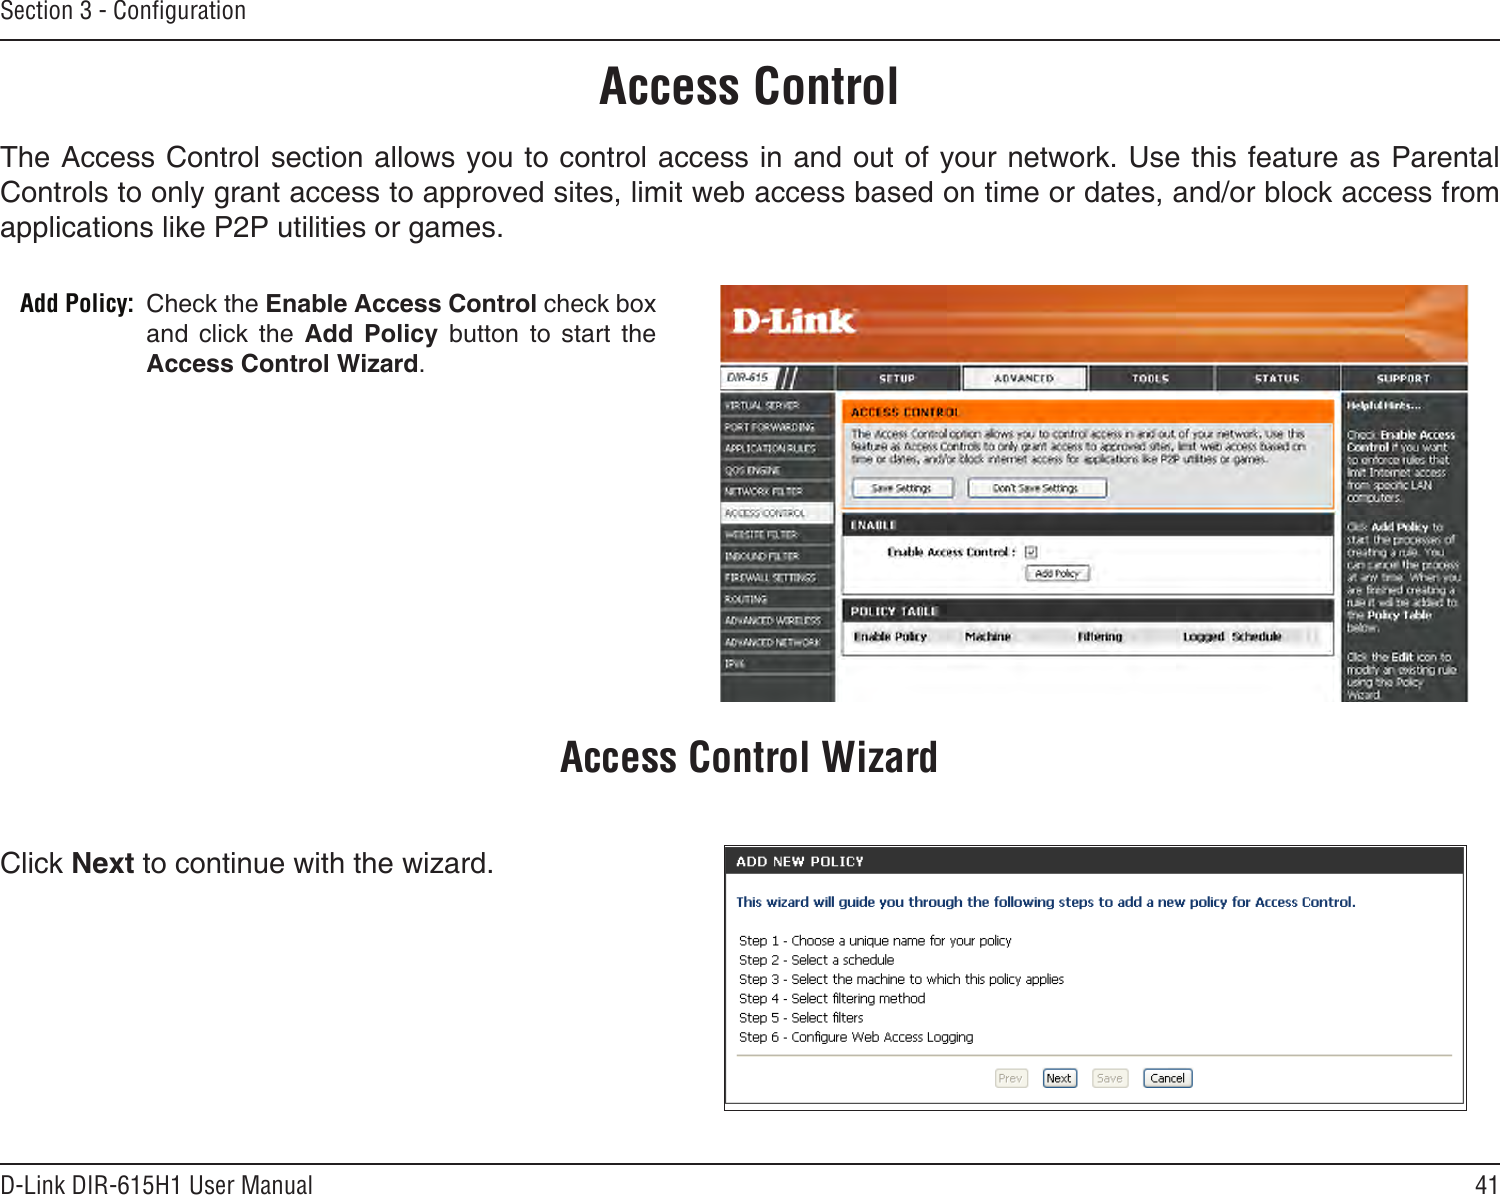 41D-Link DIR-615H1 User ManualSection 3 - CongurationAccess ControlCheck the Enable Access Control check box and  click  the  Add  Policy  button  to  start  the Access Control Wizard. Add Policy:The Access Control section allows you to control access in and out of your network. Use this feature as Parental Controls to only grant access to approved sites, limit web access based on time or dates, and/or block access from applications like P2P utilities or games.Click Next to continue with the wizard.Access Control Wizard